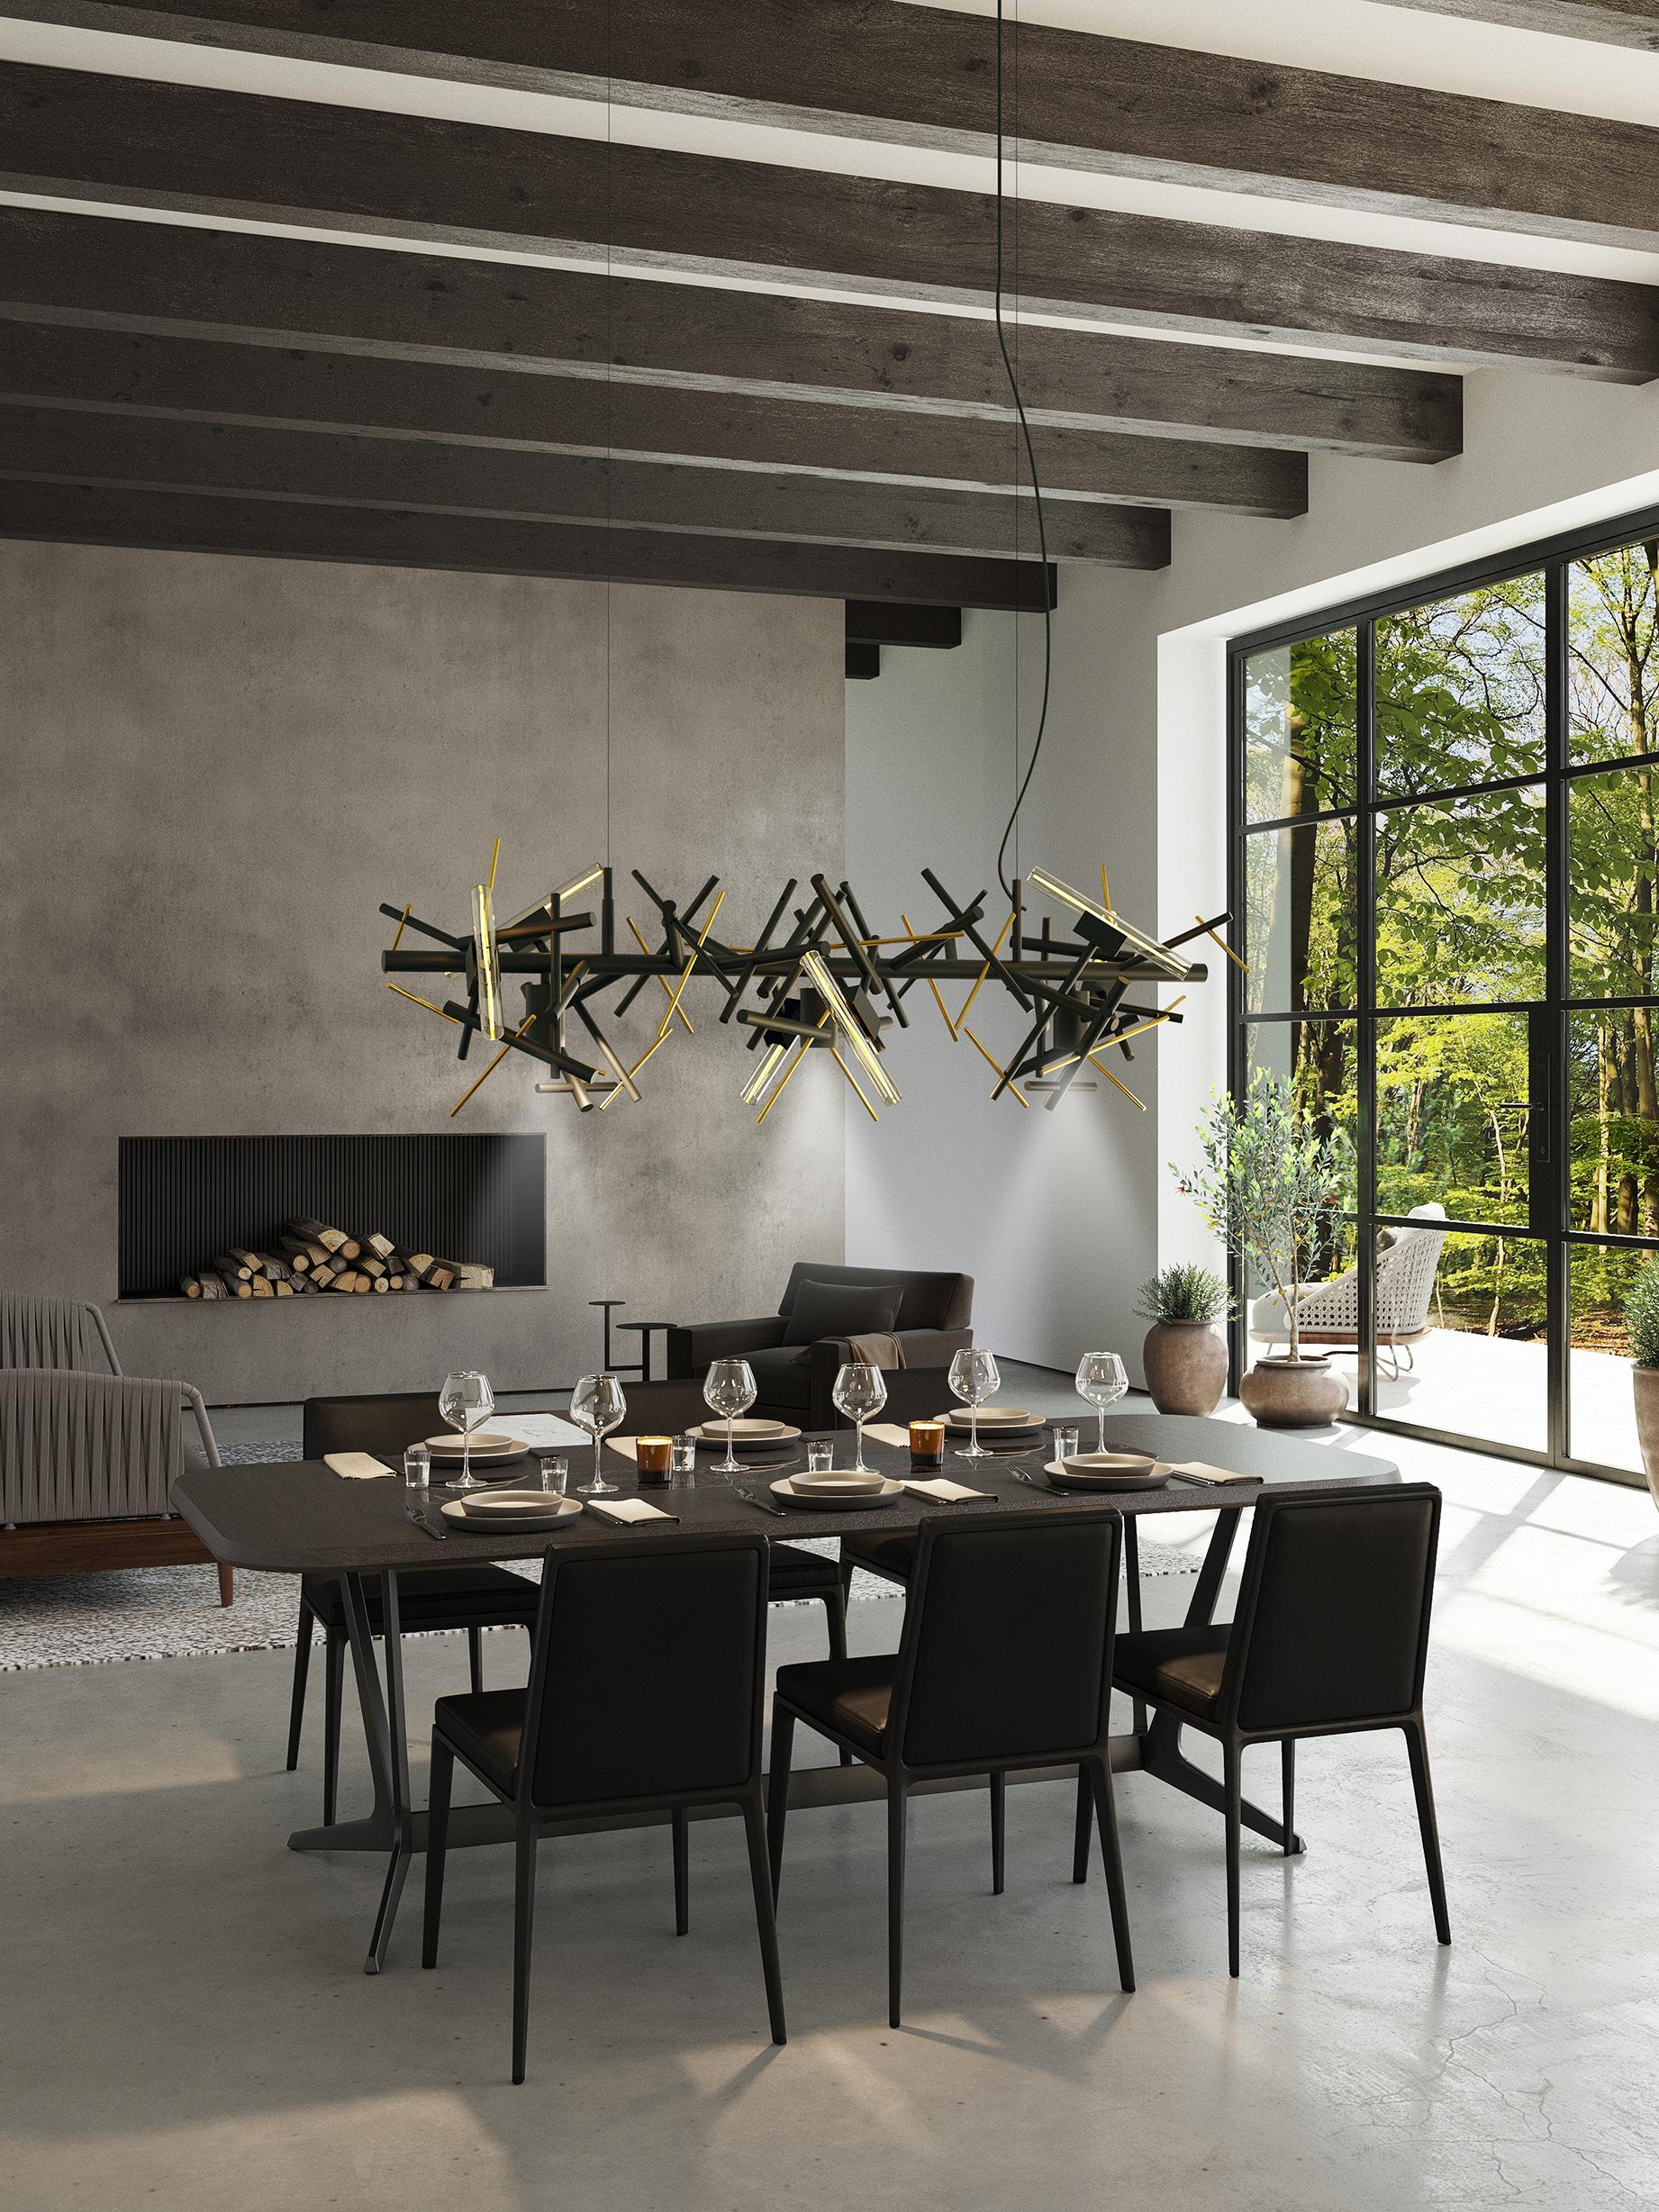 The Linea is a modern pendant in a brass burnished finish is designed by William Brand, founder of Brand van Egmond. Full of character and created to bring light above a table, the pendant is available in four dimensions and in the finishes black